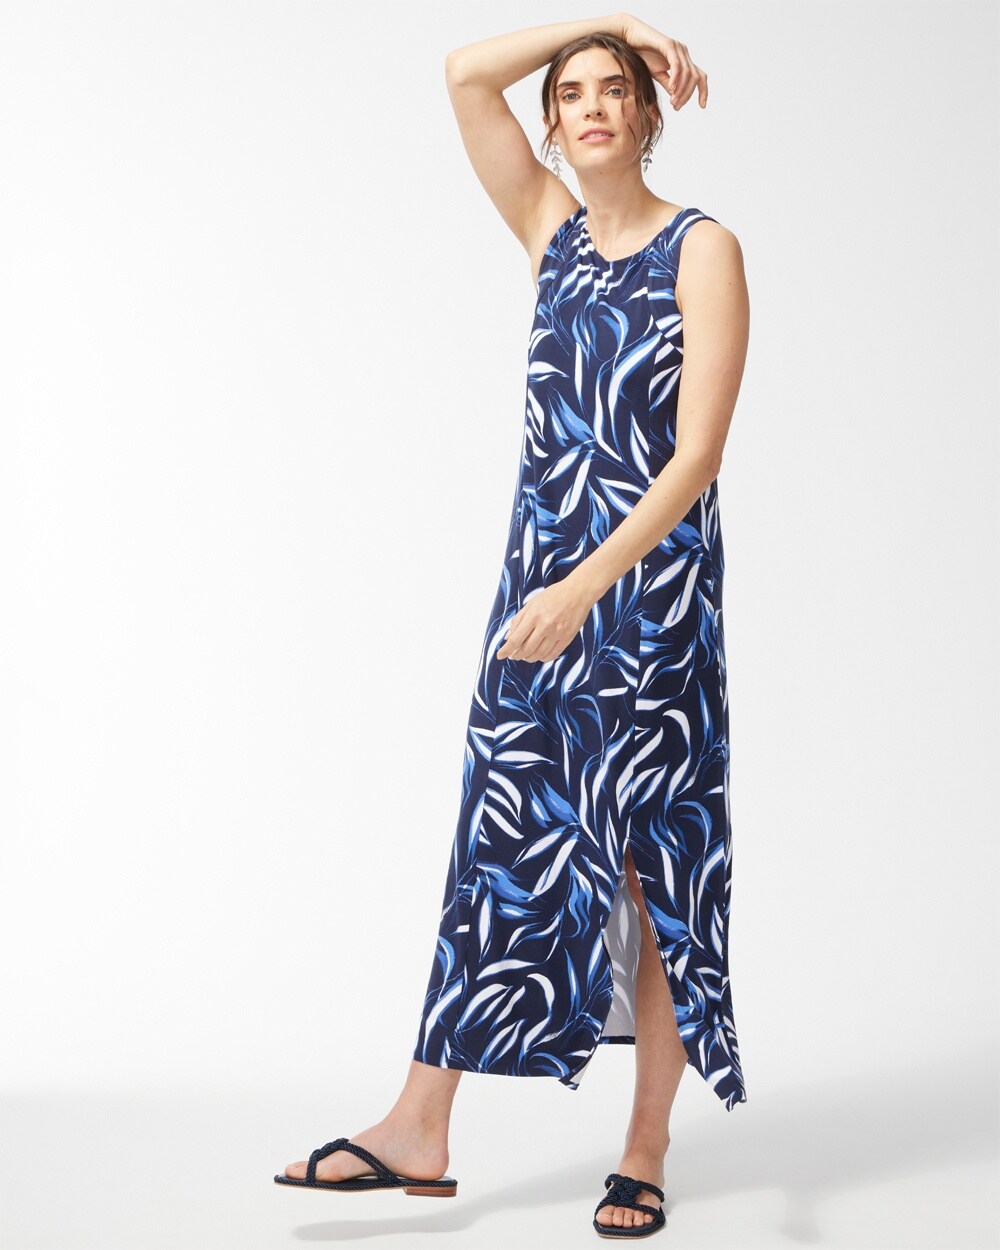 Leaf Print Sleeveless Maxi Dress video preview image, click to start video